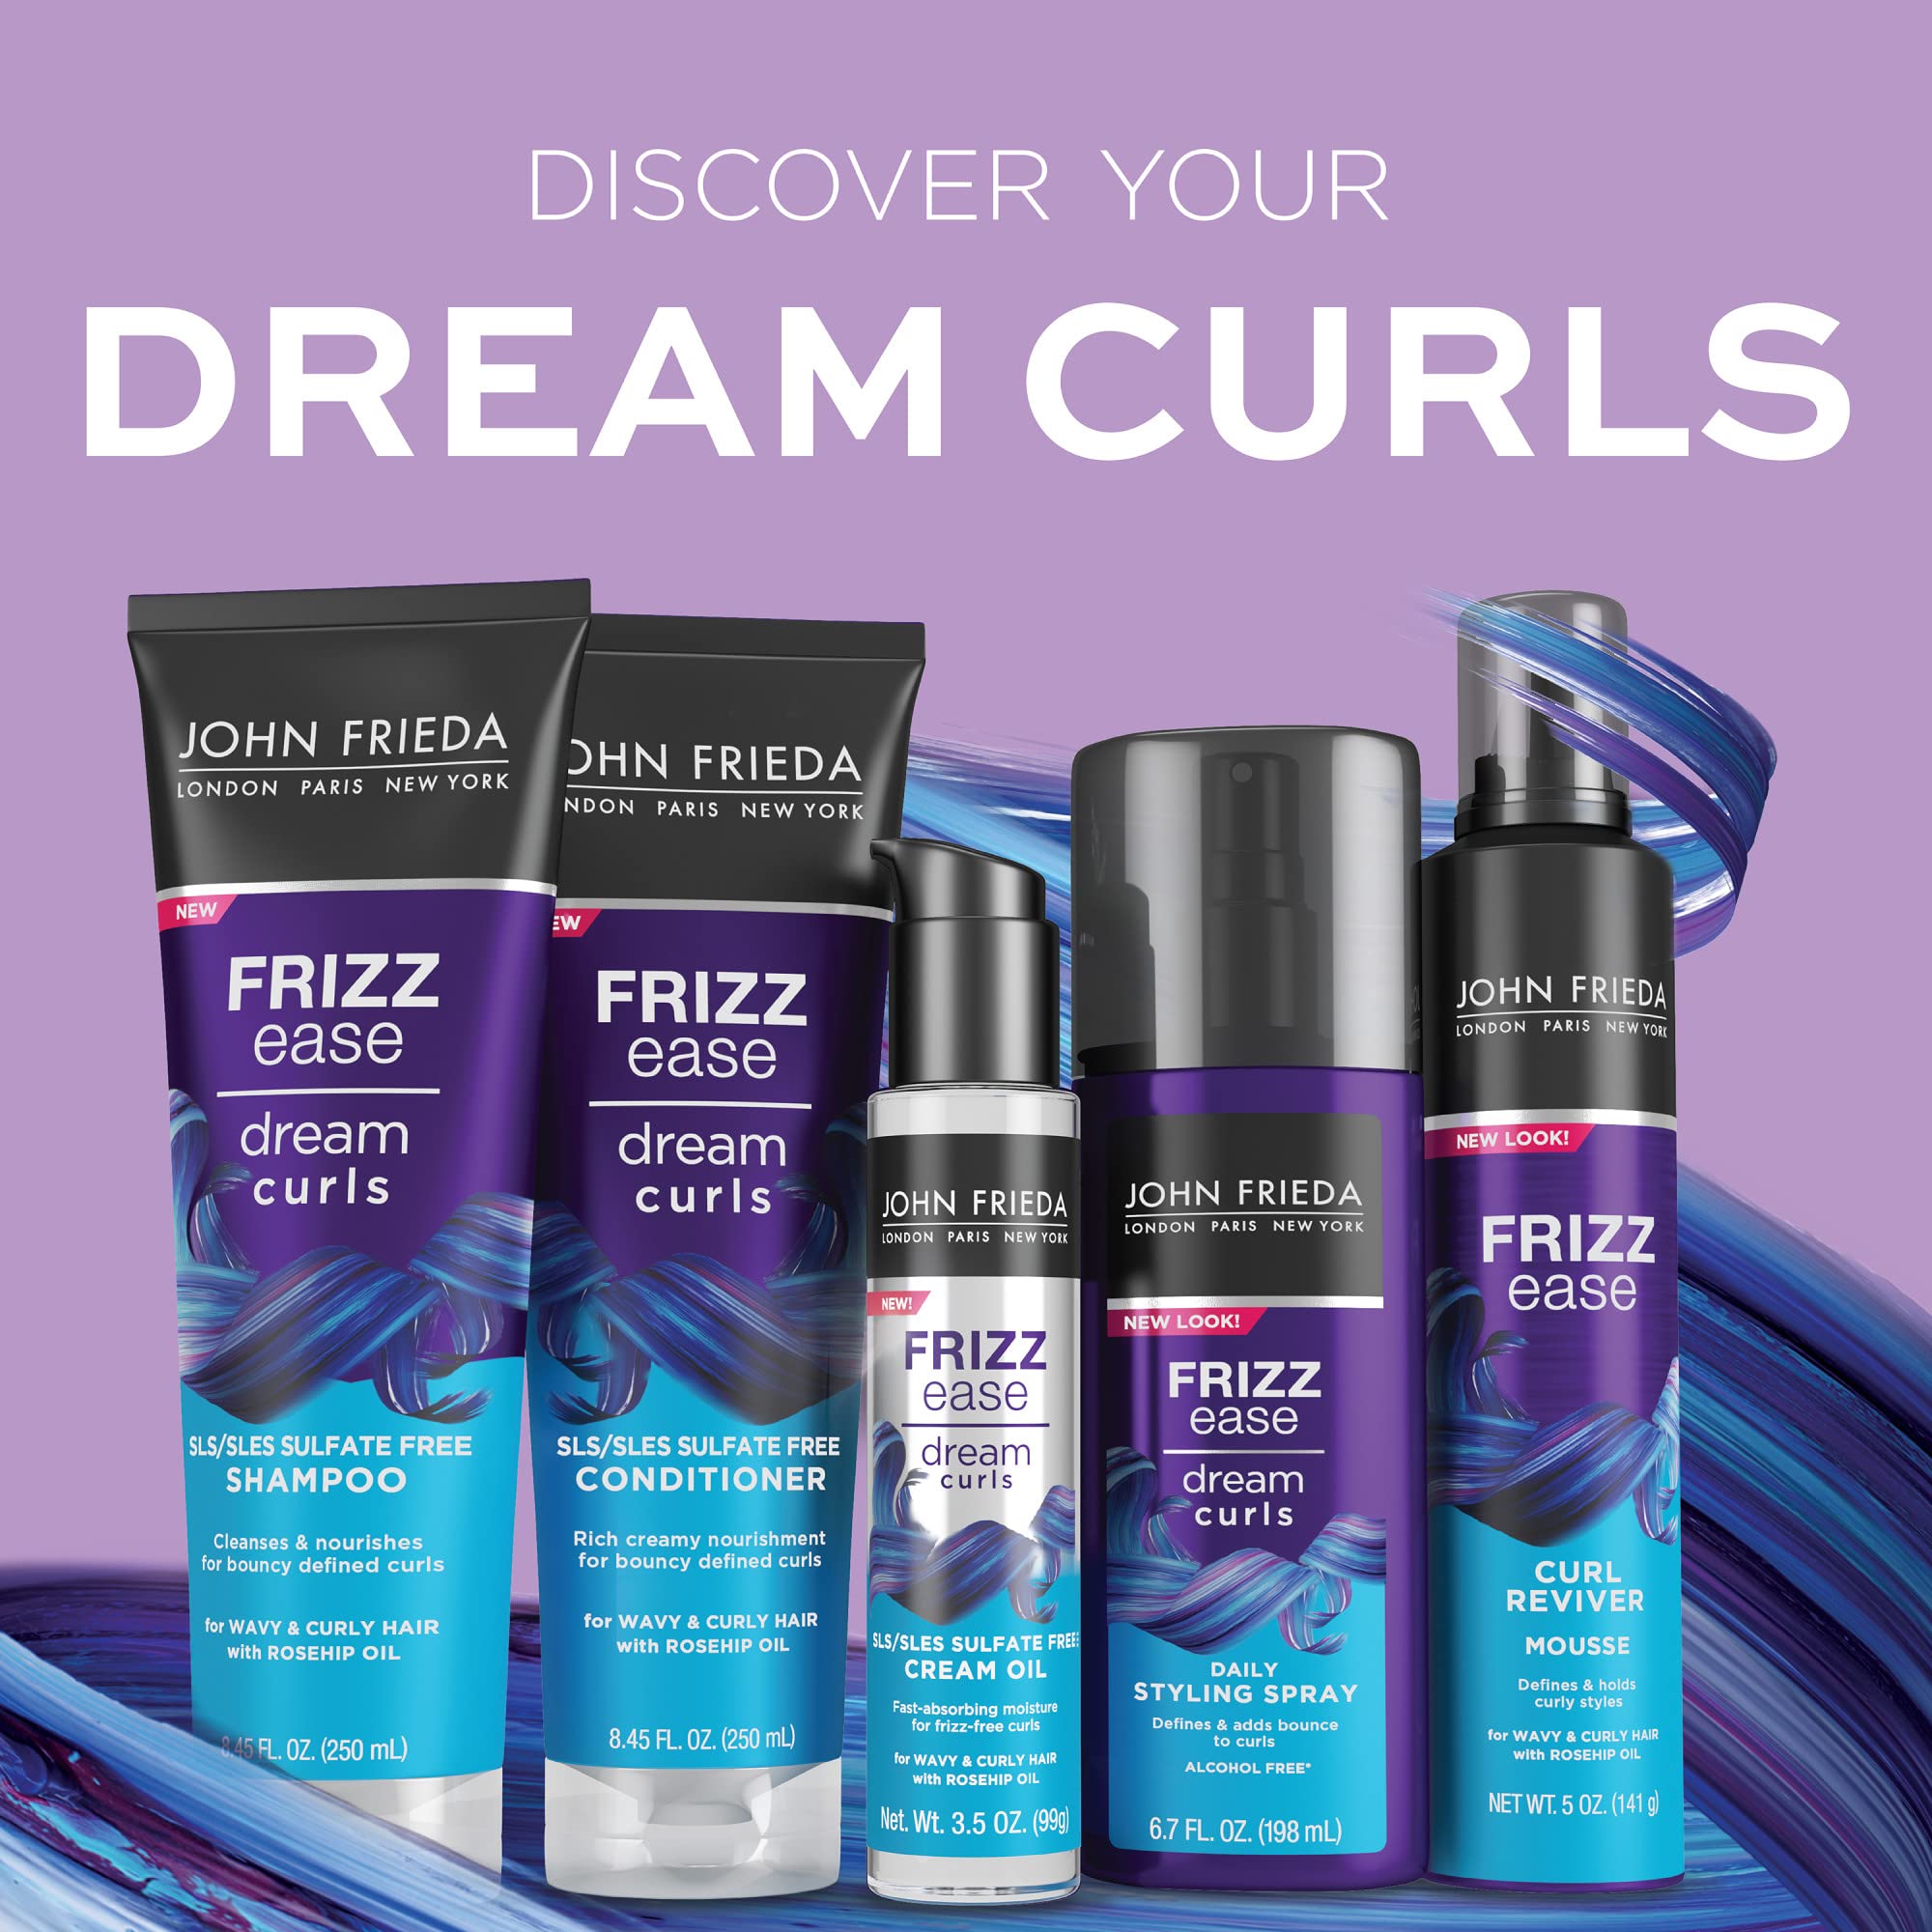 John Frieda Anti Frizz, Frizz Ease Dream Curls Shampoo, SLS/SLES Sulfate Free Shampoo for Curly Hair, Helps Control Frizz, with Curl Enhancing Technology, 8.45 Fluid Ounces